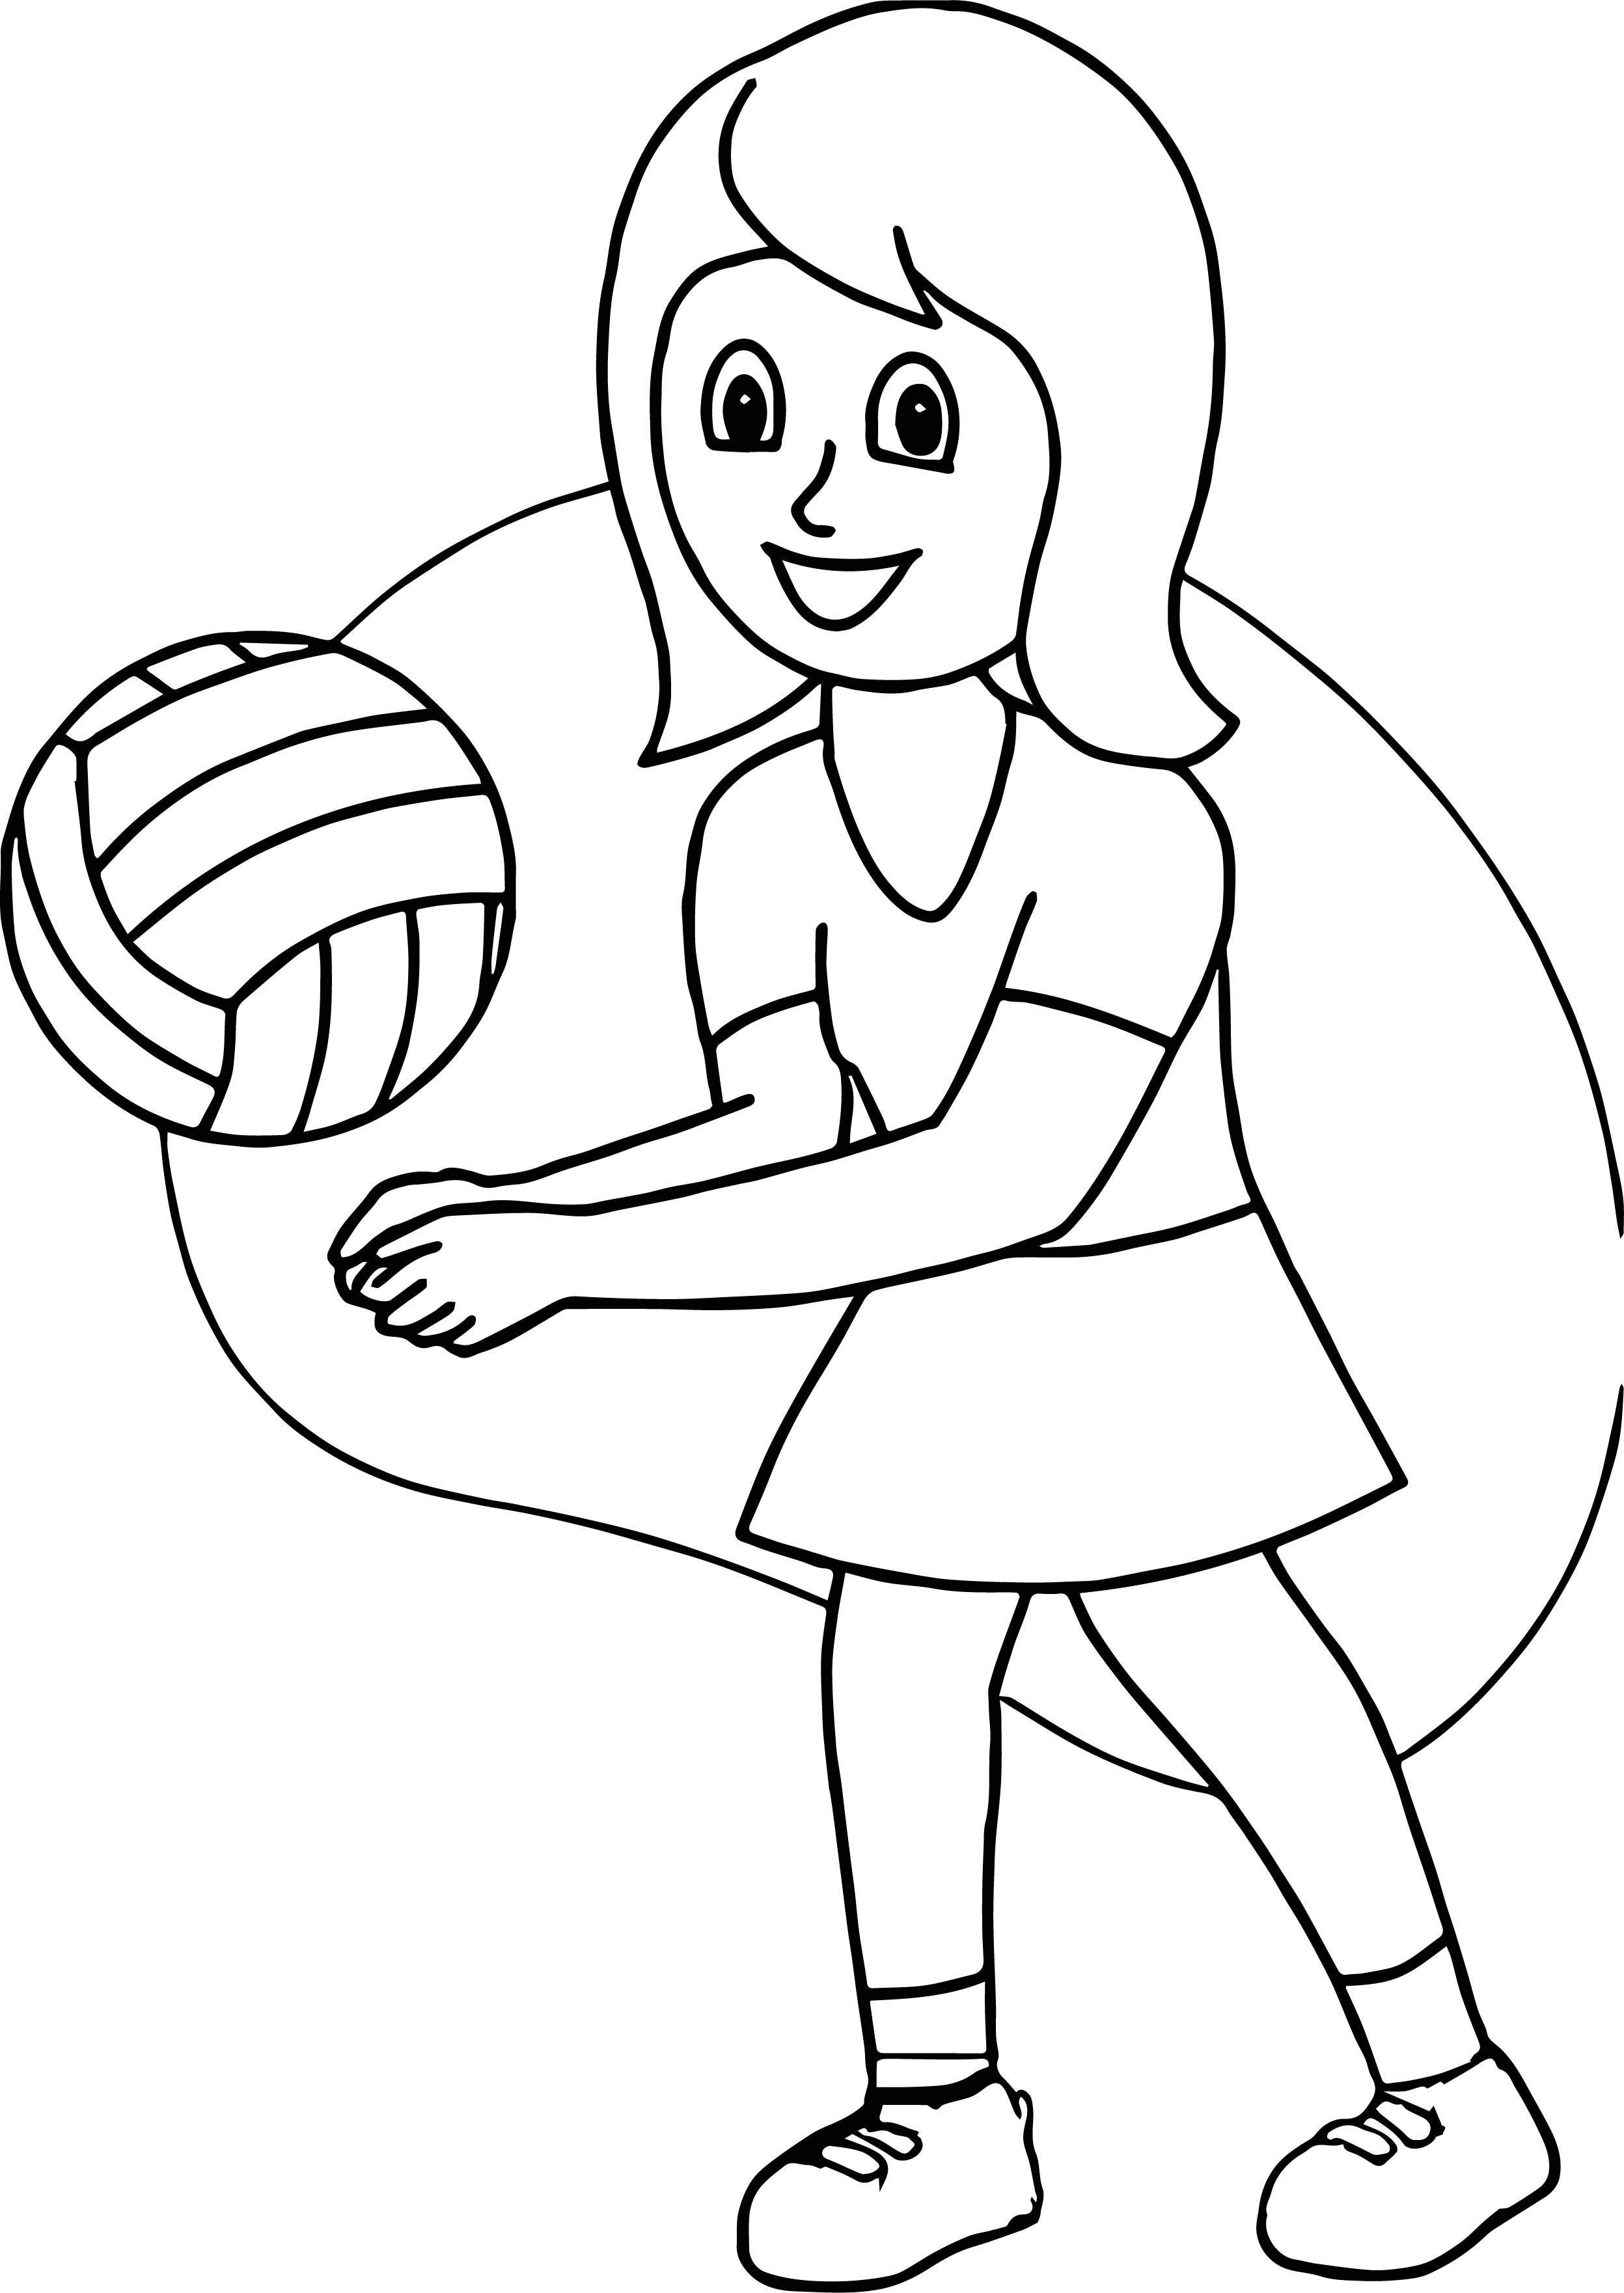 Volleyball Coloring Pages at GetColorings.com | Free ...